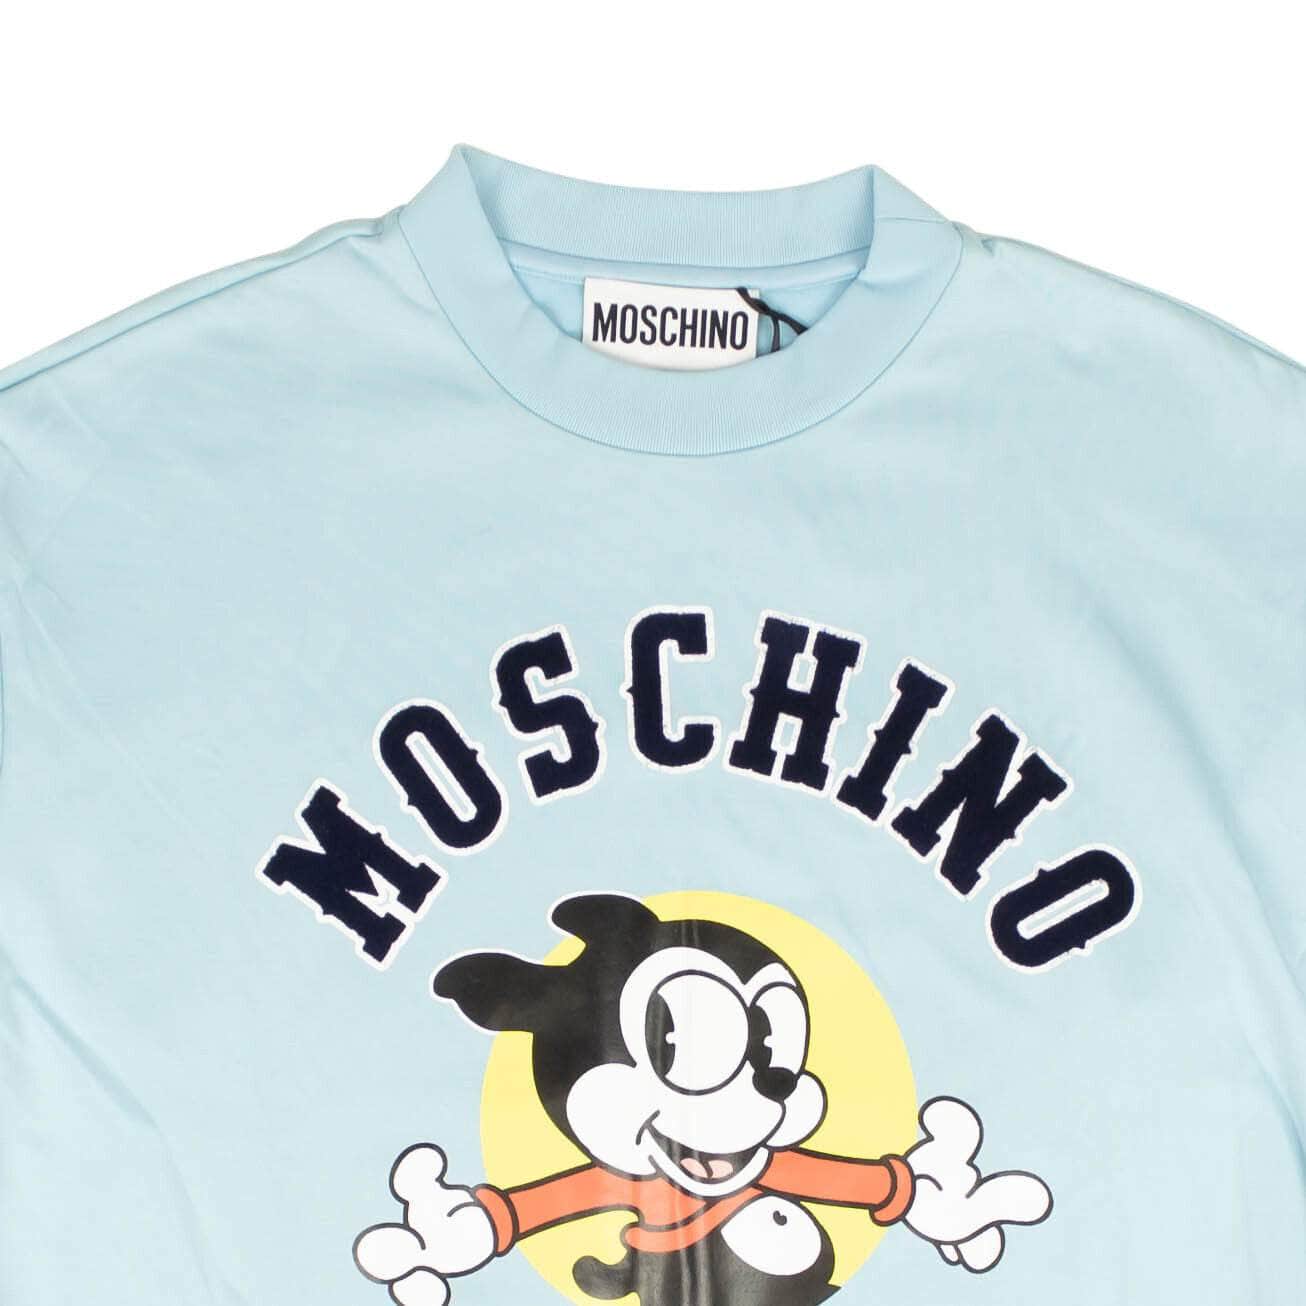 Moschino Couture channelenable-all, chicmi, couponcollection, gender-womens, main-clothing, moschino-couture, size-38, size-40, size-42, size-44, under-250, womens-hoodies-sweatshirts Light Blue Crewneck Logo Sweatshirt Dress